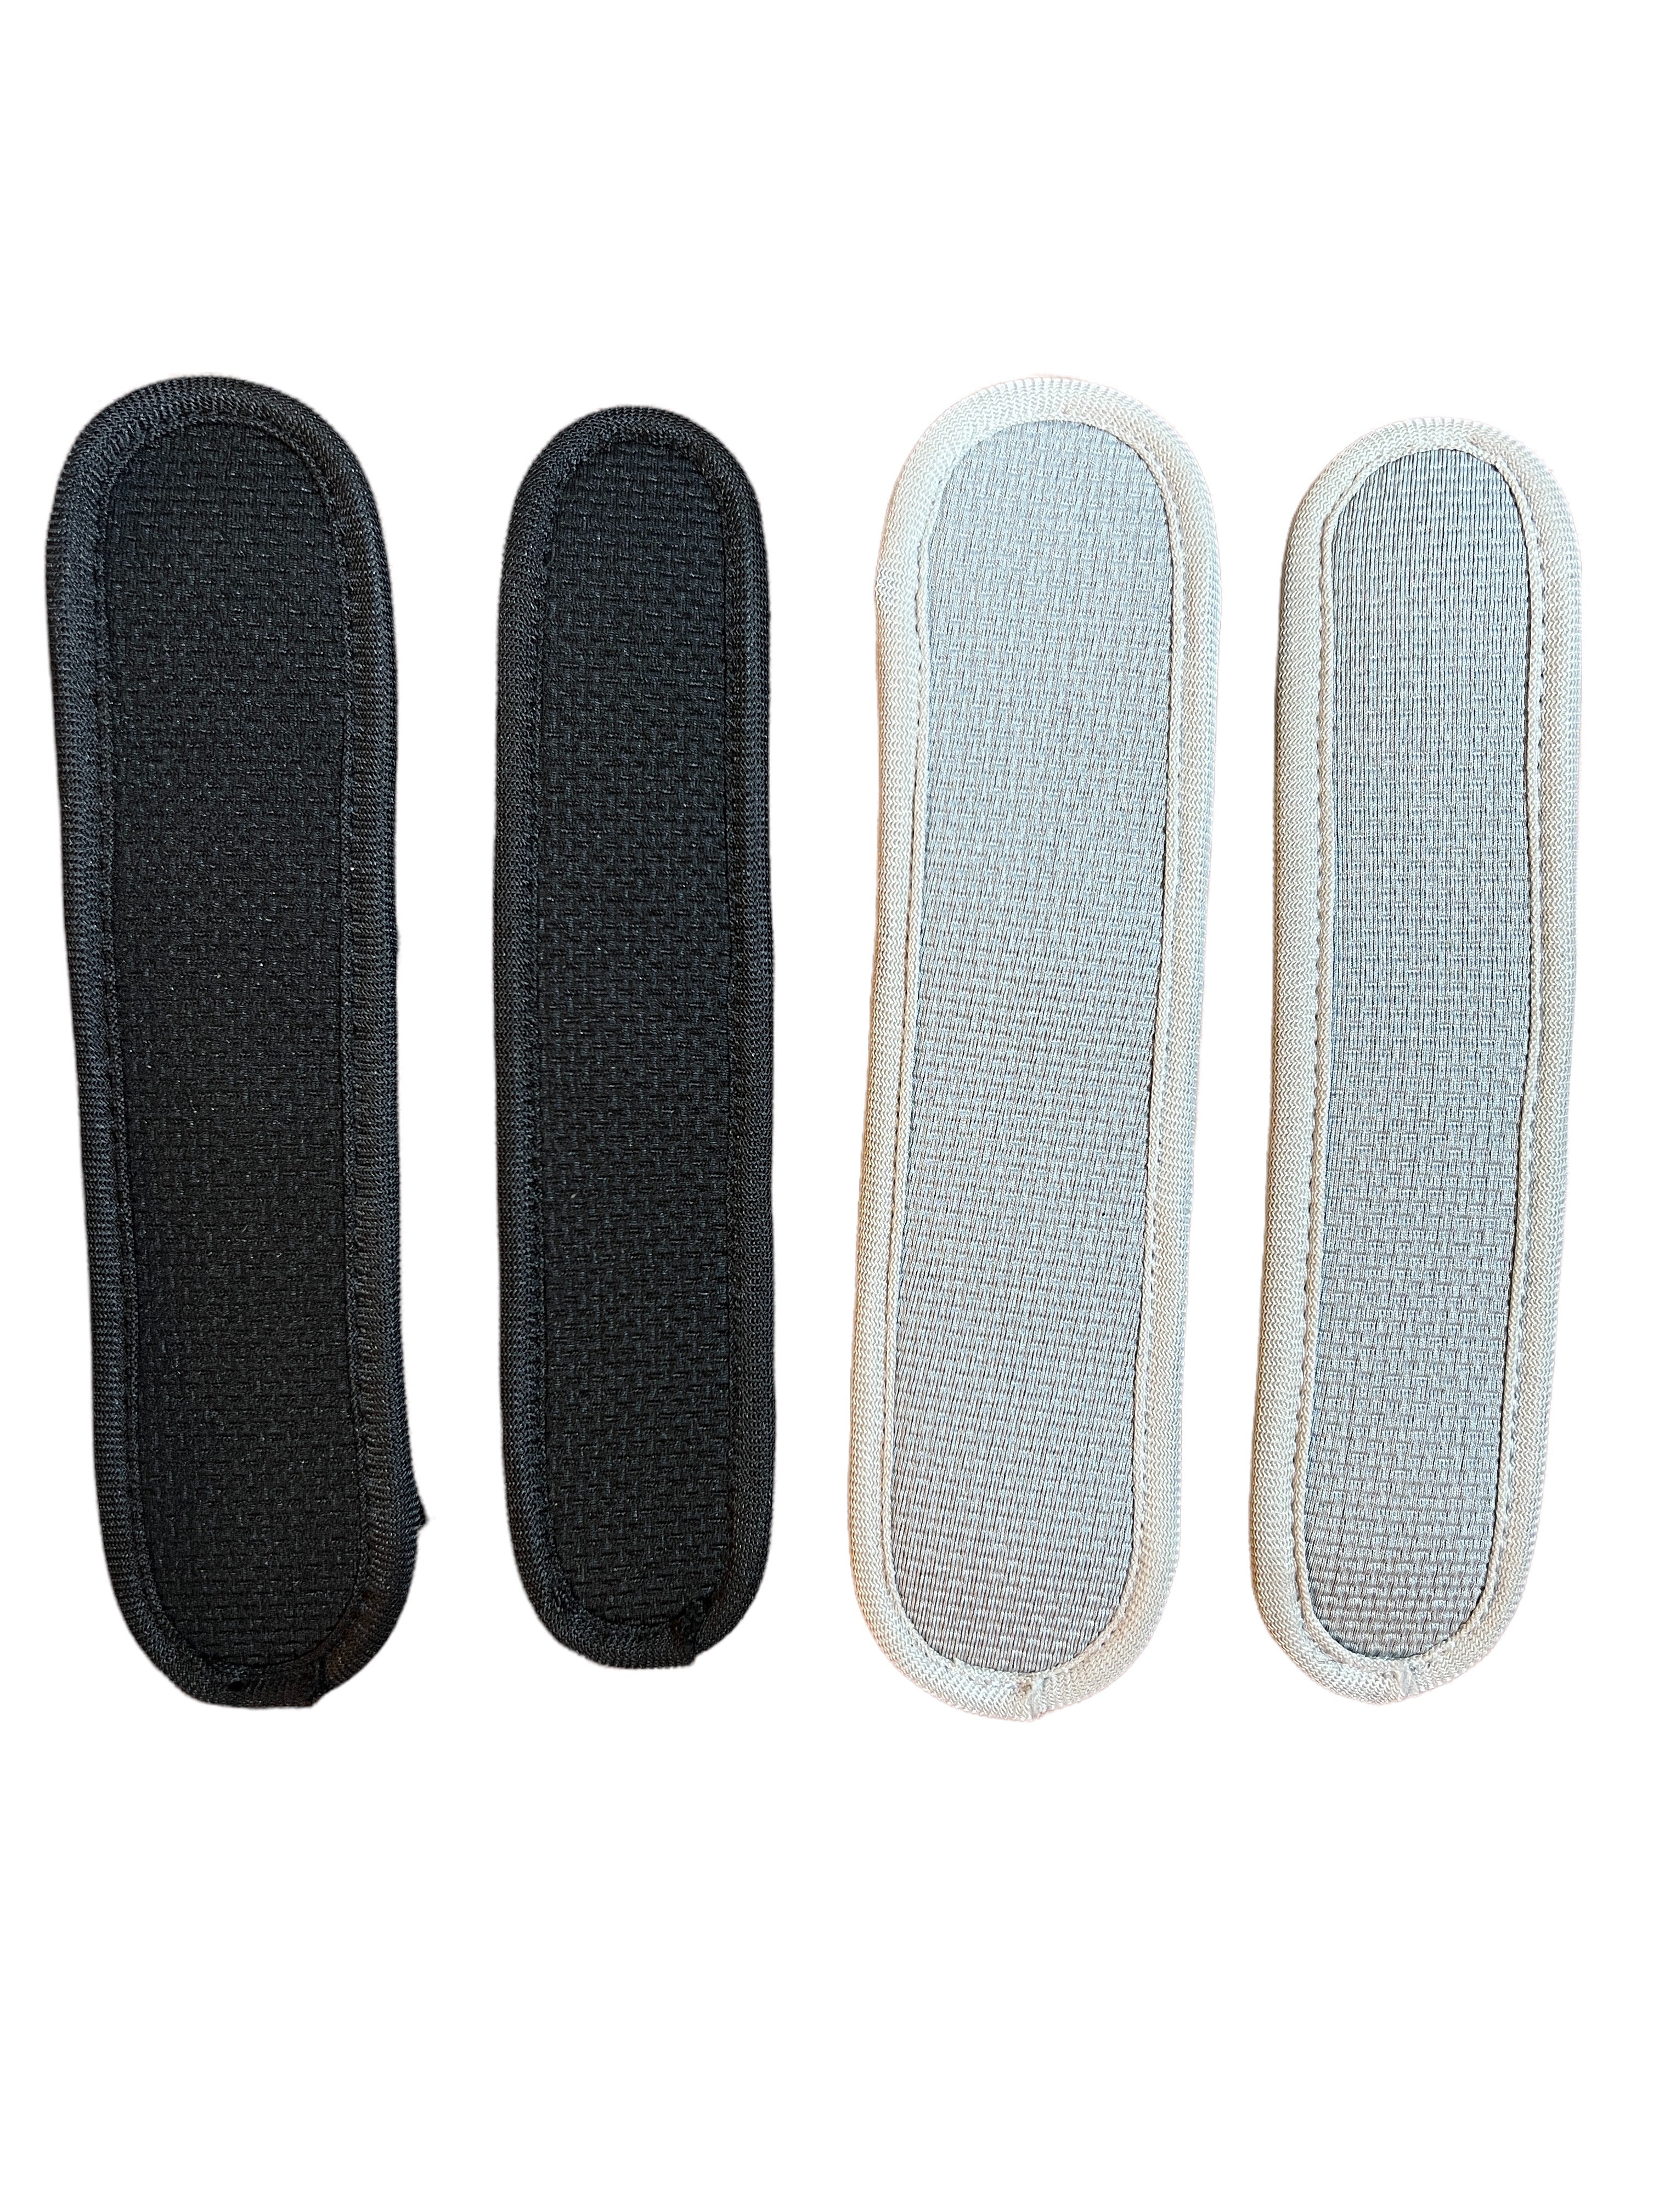 CentralSound Universal Mesh and Zipper Headband Pad Cover Part for Headphones and Headsets - CentralSound